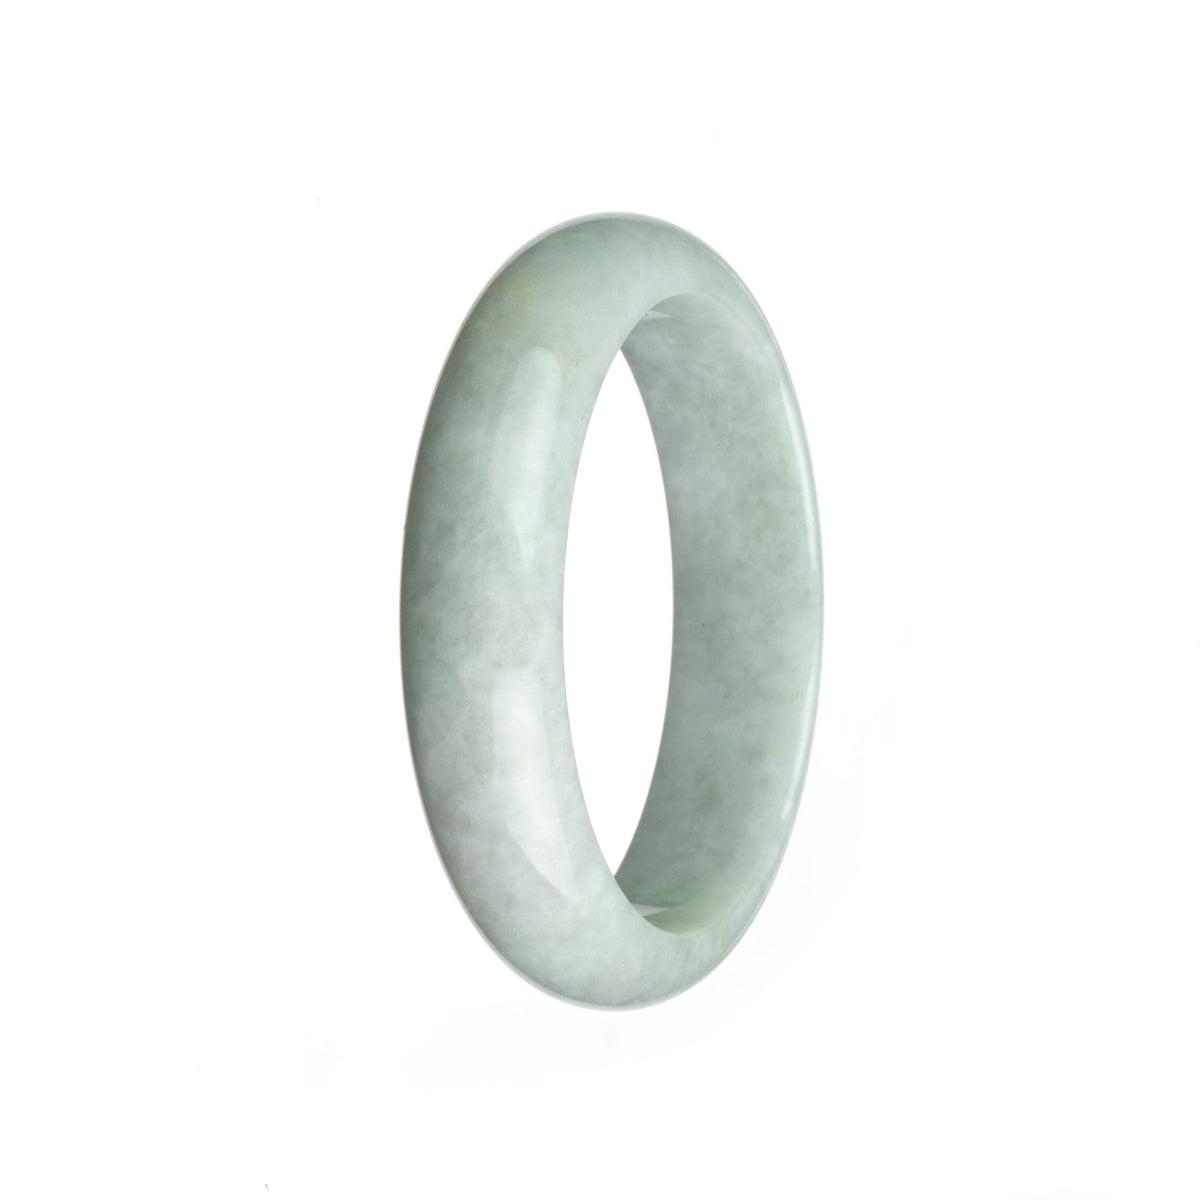 An exquisite white jade bangle, featuring a half-moon design, measuring 58mm in diameter. Perfect for adding a touch of elegance to any outfit.